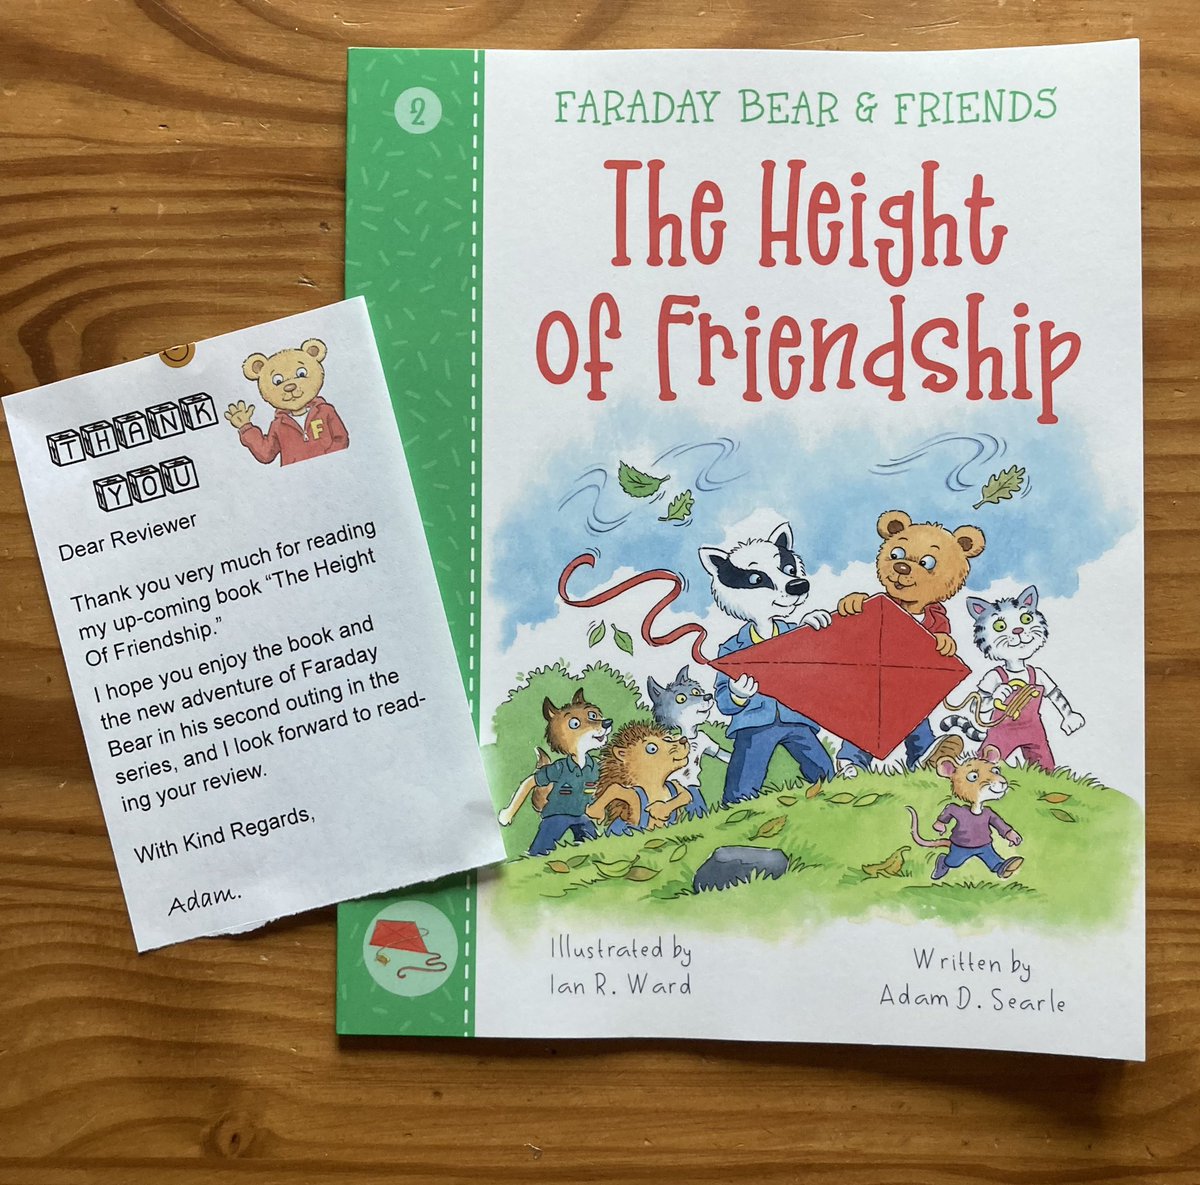 Thank you @hyggebooktours and @searle_author for my copy of #TheHeightOfFriendship for the upcoming #blogtour

Can’t wait to read this with the boys and girls in my class! 

#booktwt #bookblogger